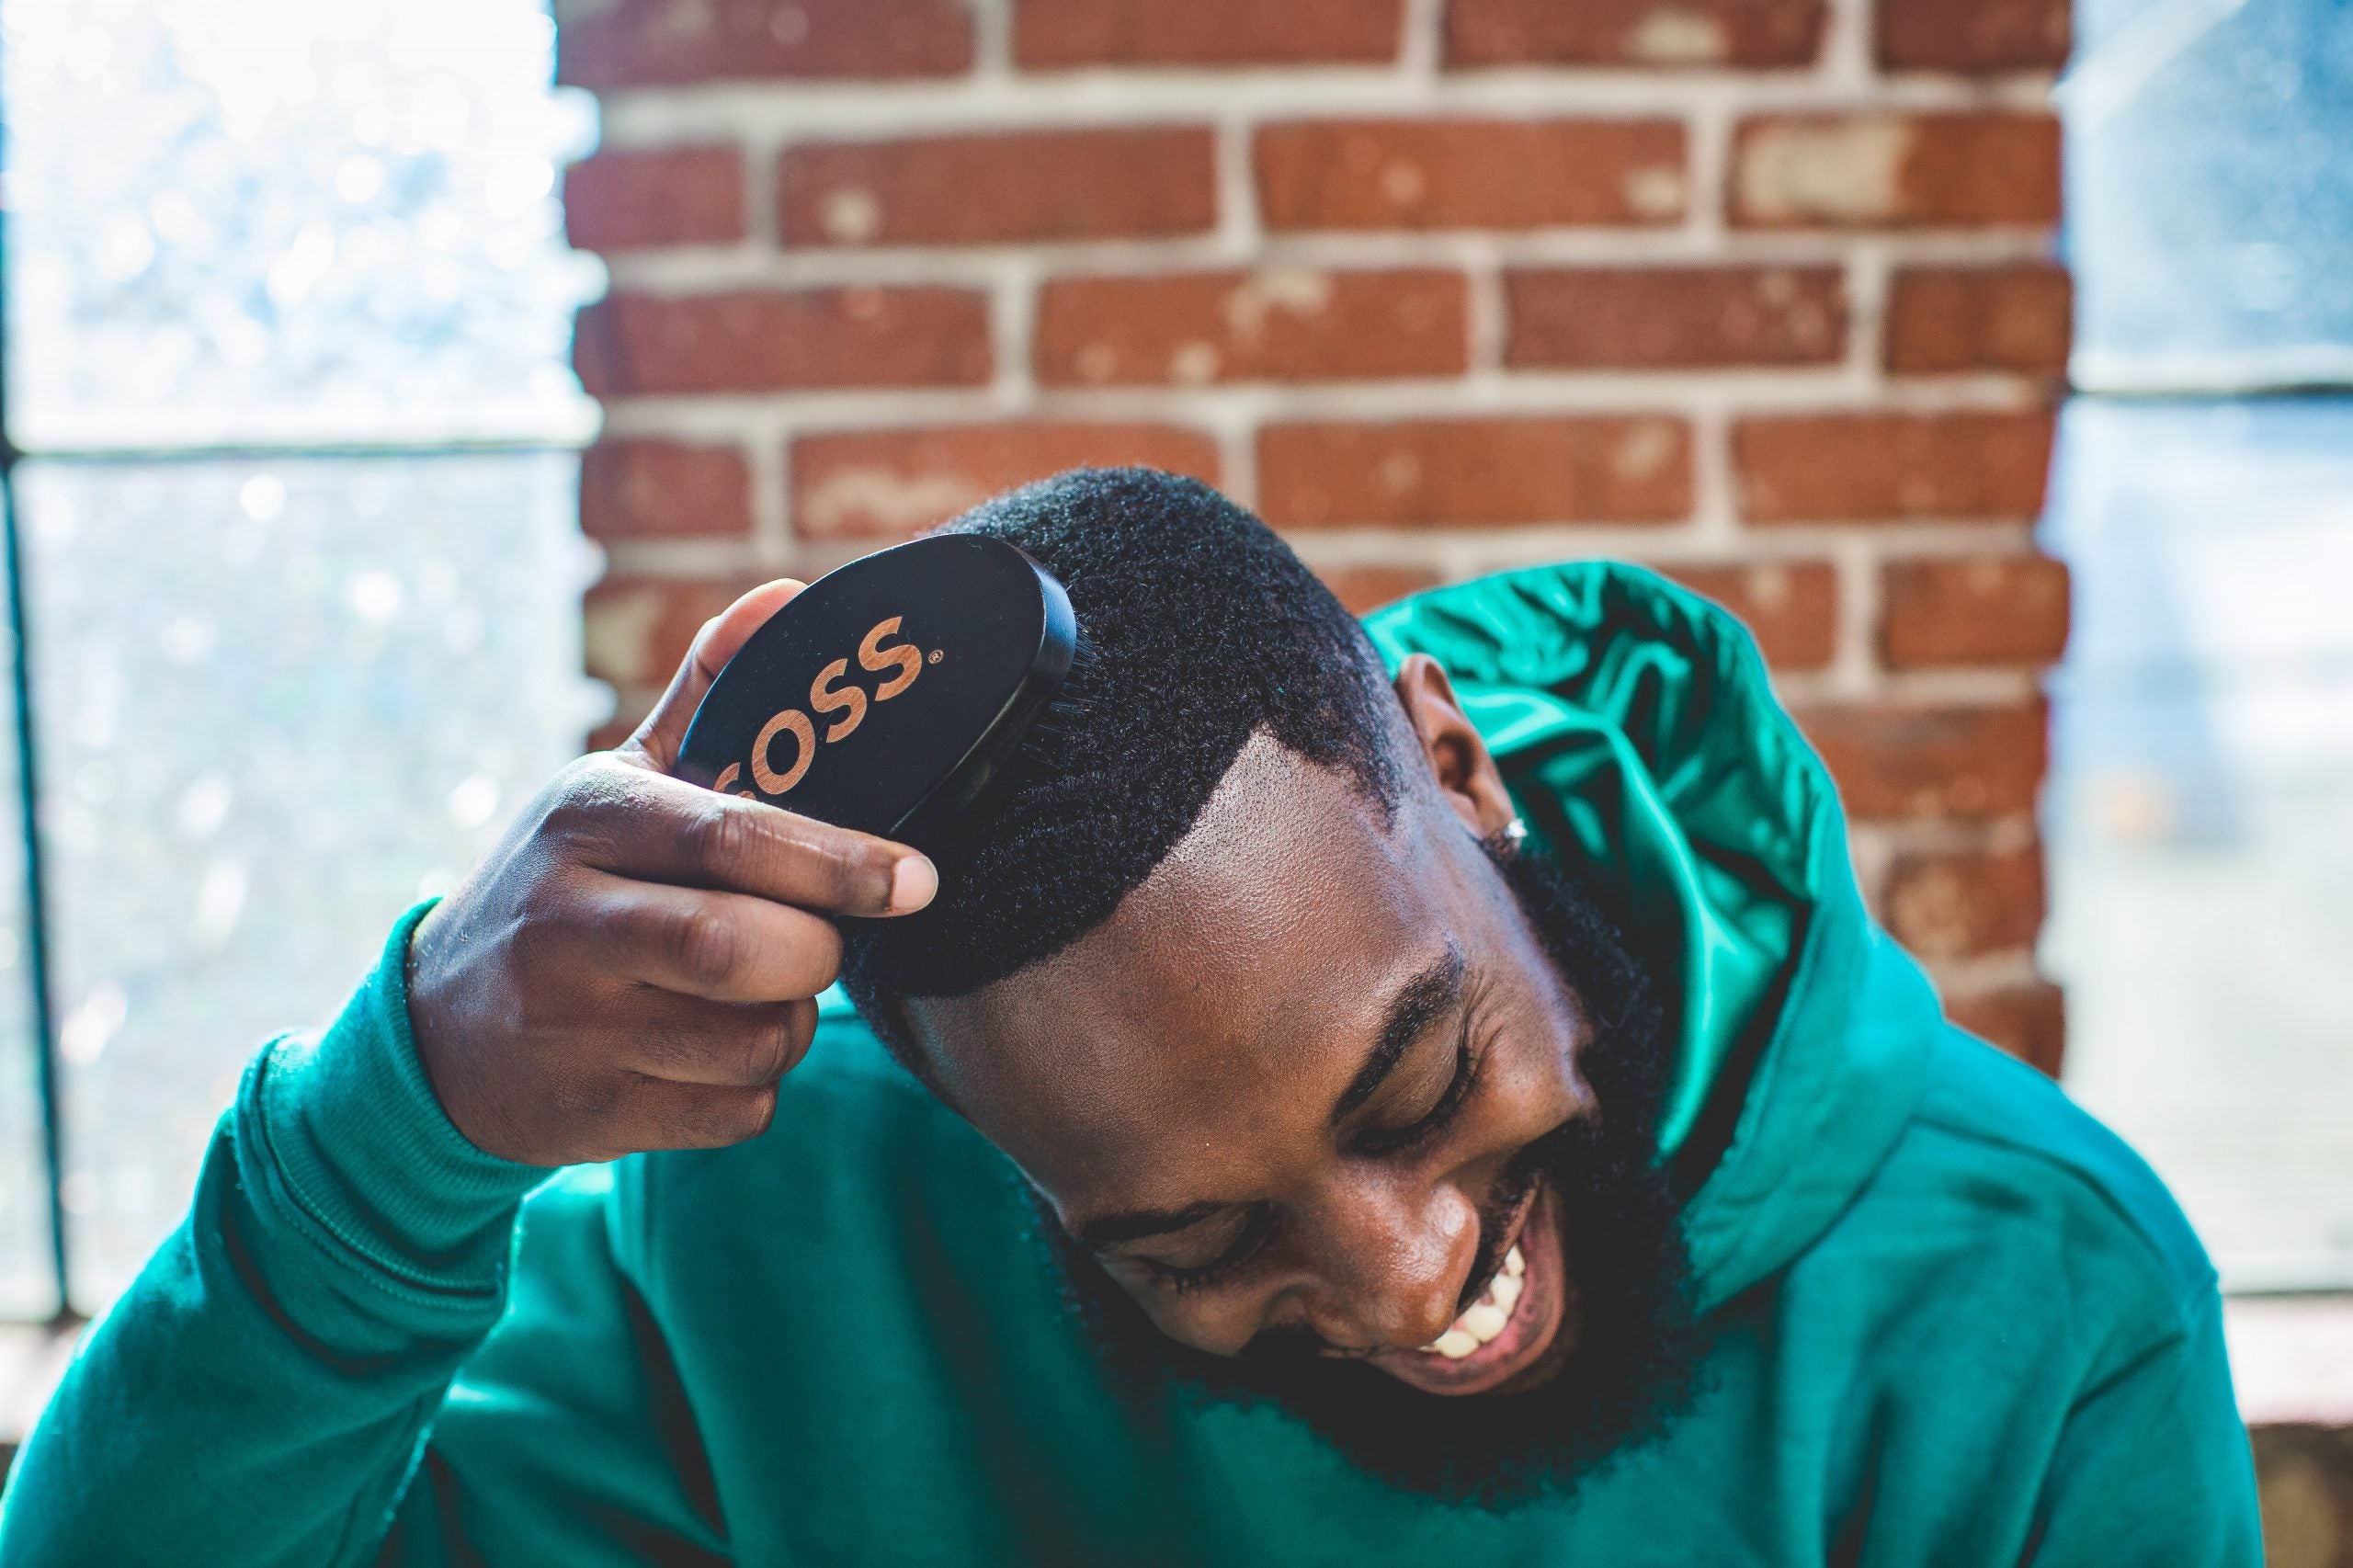 Introducing SOSS: The Grooming Brand Your Man Will Be Obsessed With